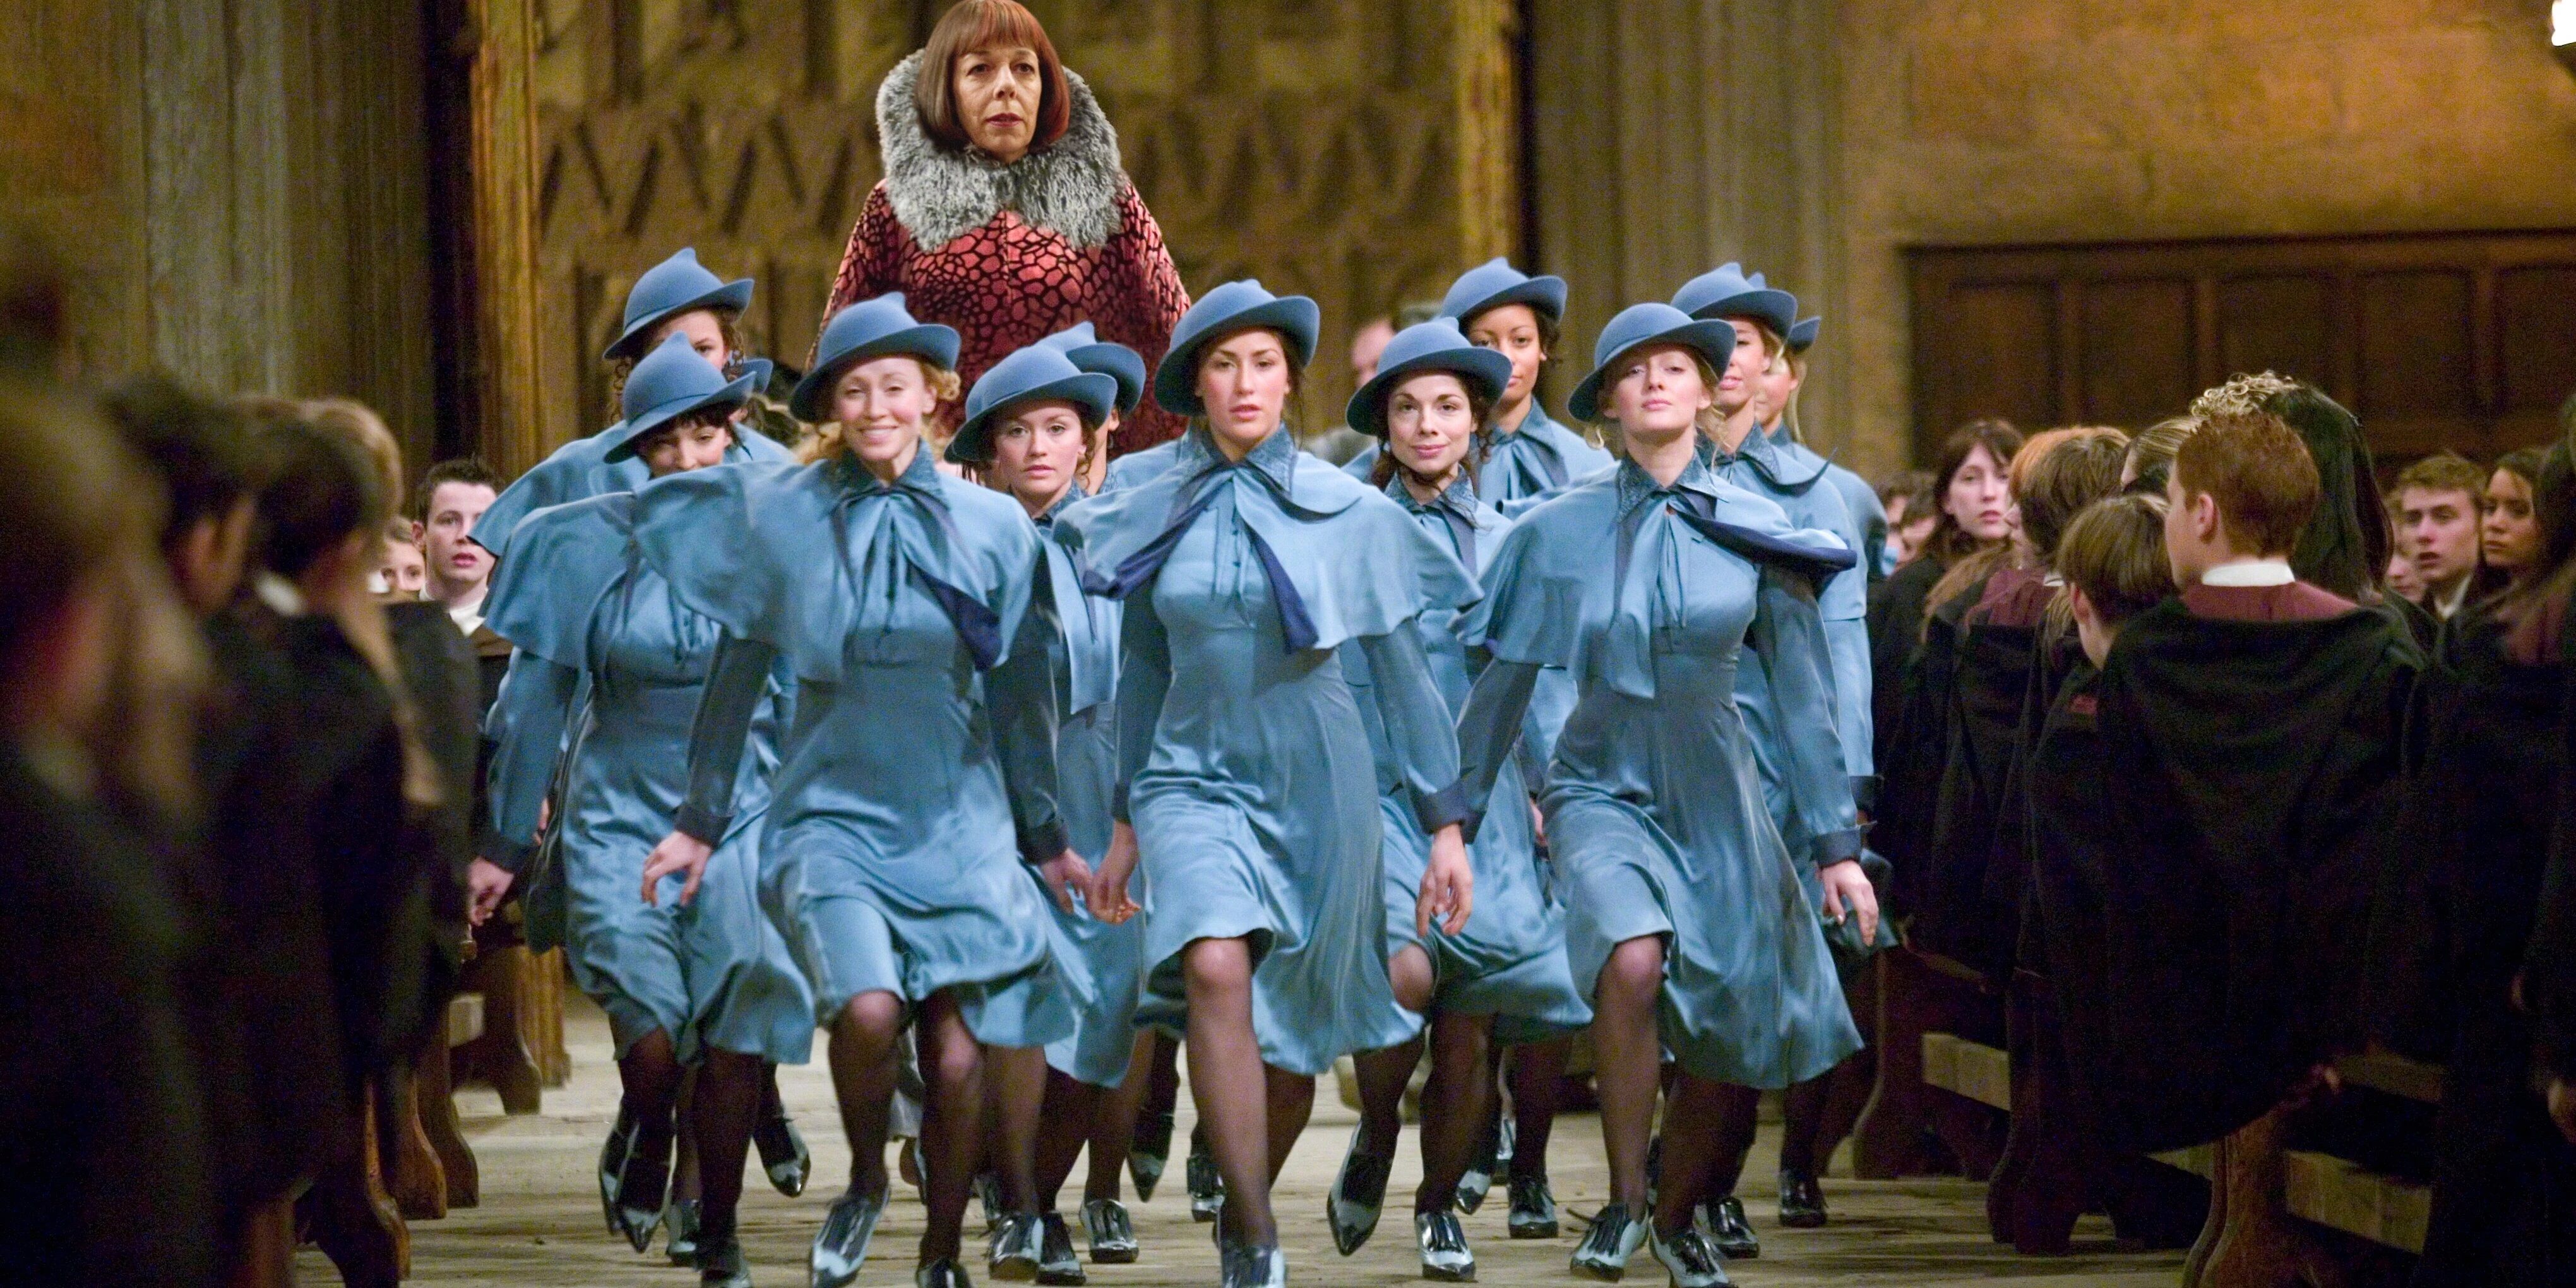 The Beauxbatons arrive at Hogwarts in Harry Potter And The Goblet of Fire.